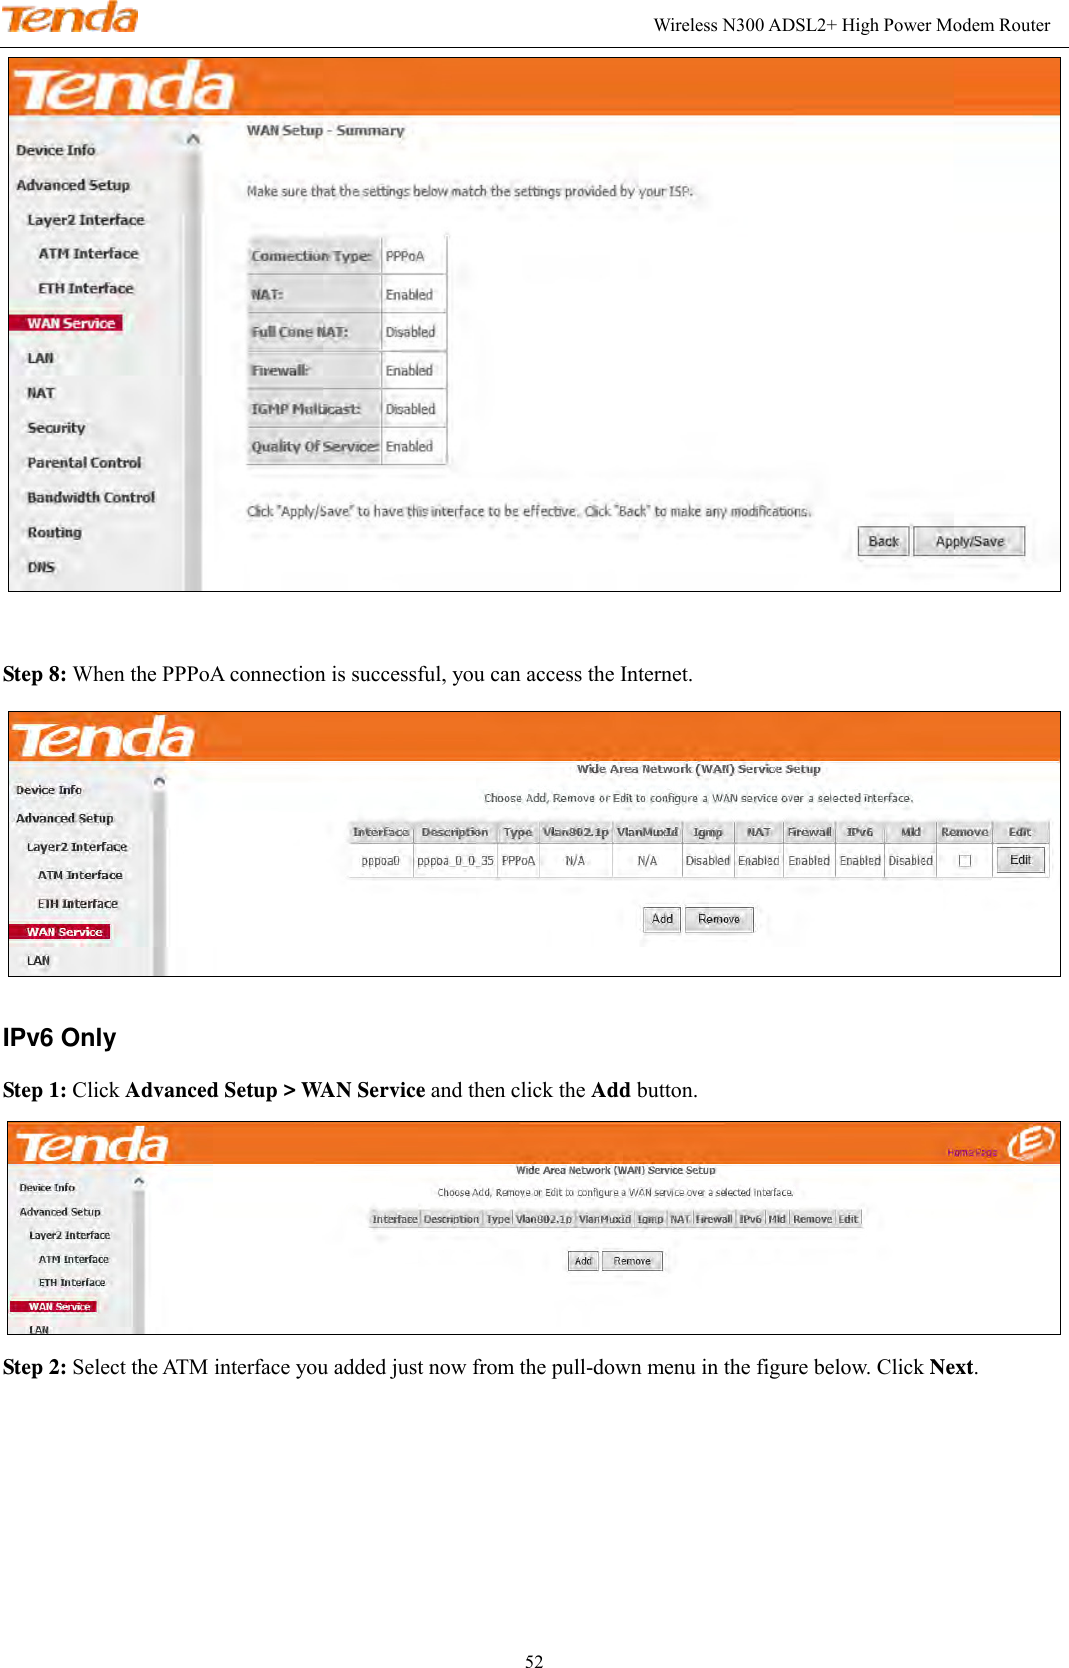                                                                                                               Wireless N300 ADSL2+ High Power Modem Router 52   Step 8: When the PPPoA connection is successful, you can access the Internet.  IPv6 Only Step 1: Click Advanced Setup &gt; WAN Service and then click the Add button.    Step 2: Select the ATM interface you added just now from the pull-down menu in the figure below. Click Next. 